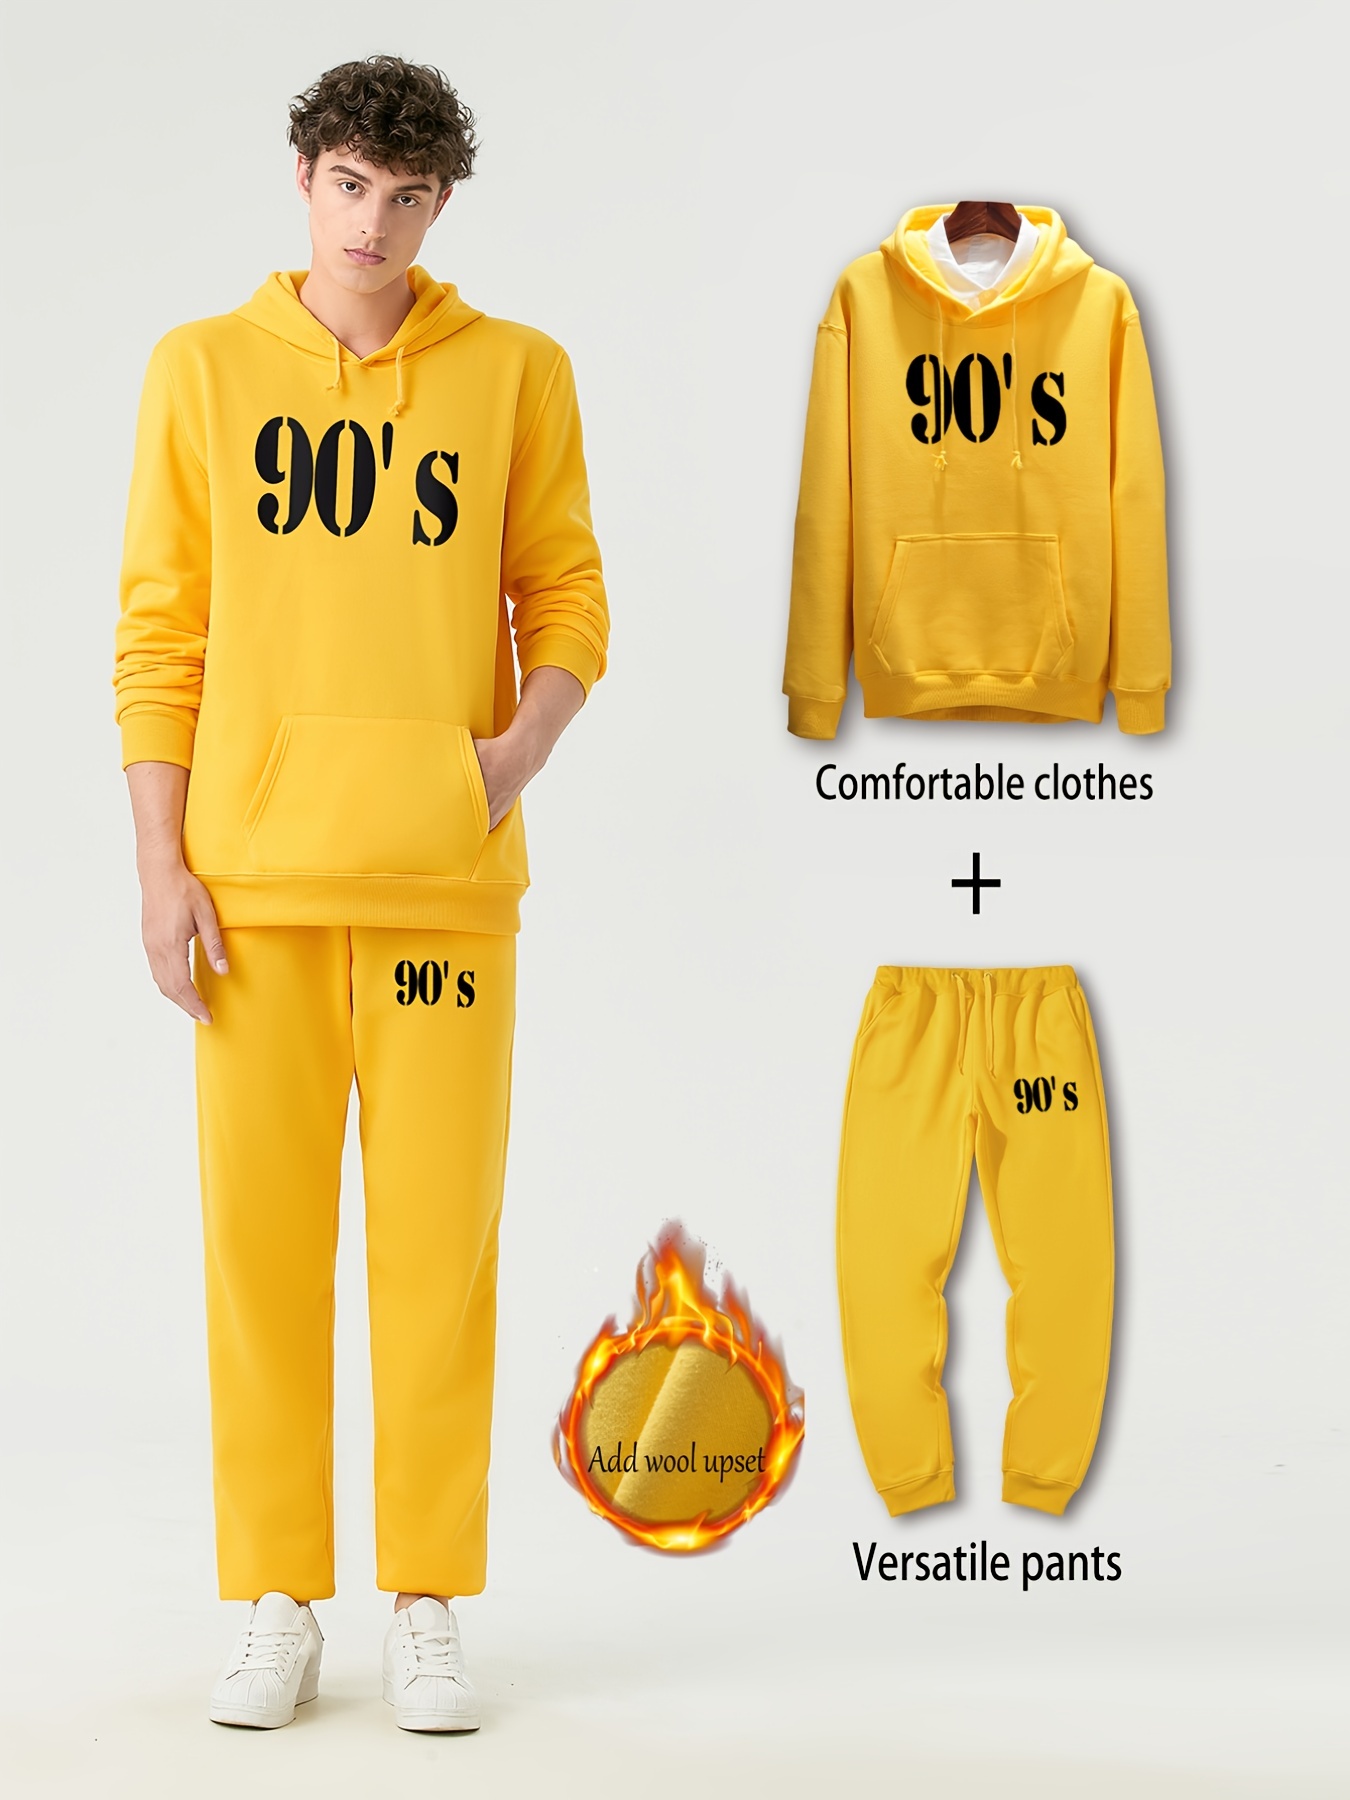 2pcs Mens Casual Warm Sweatsuits Graphic Print Hoodie With Kangaroo Pocket  Drawstring Sweatpants, Shop The Latest Trends